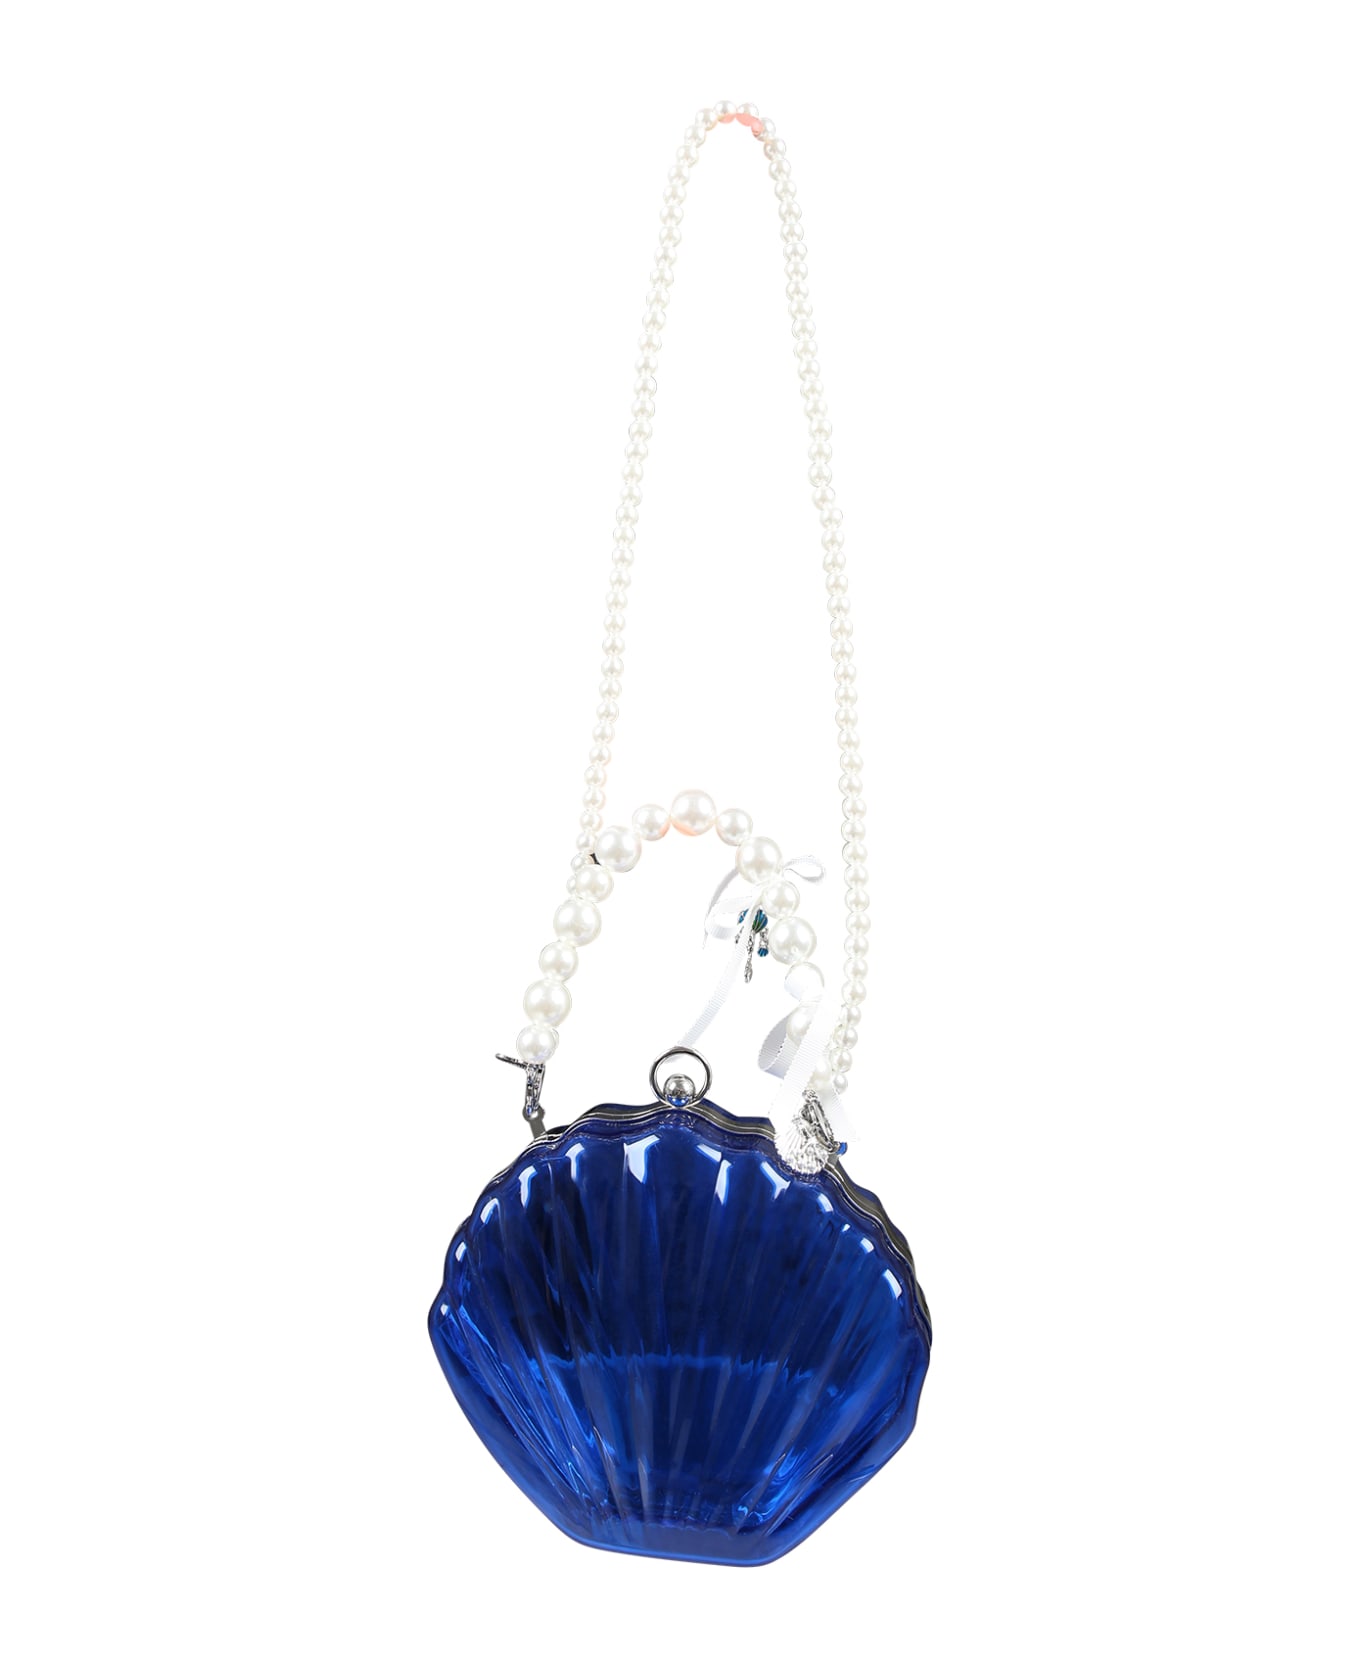 Monnalisa Blue Bag For Girl With Pearl And Shells - Blue アクセサリー＆ギフト